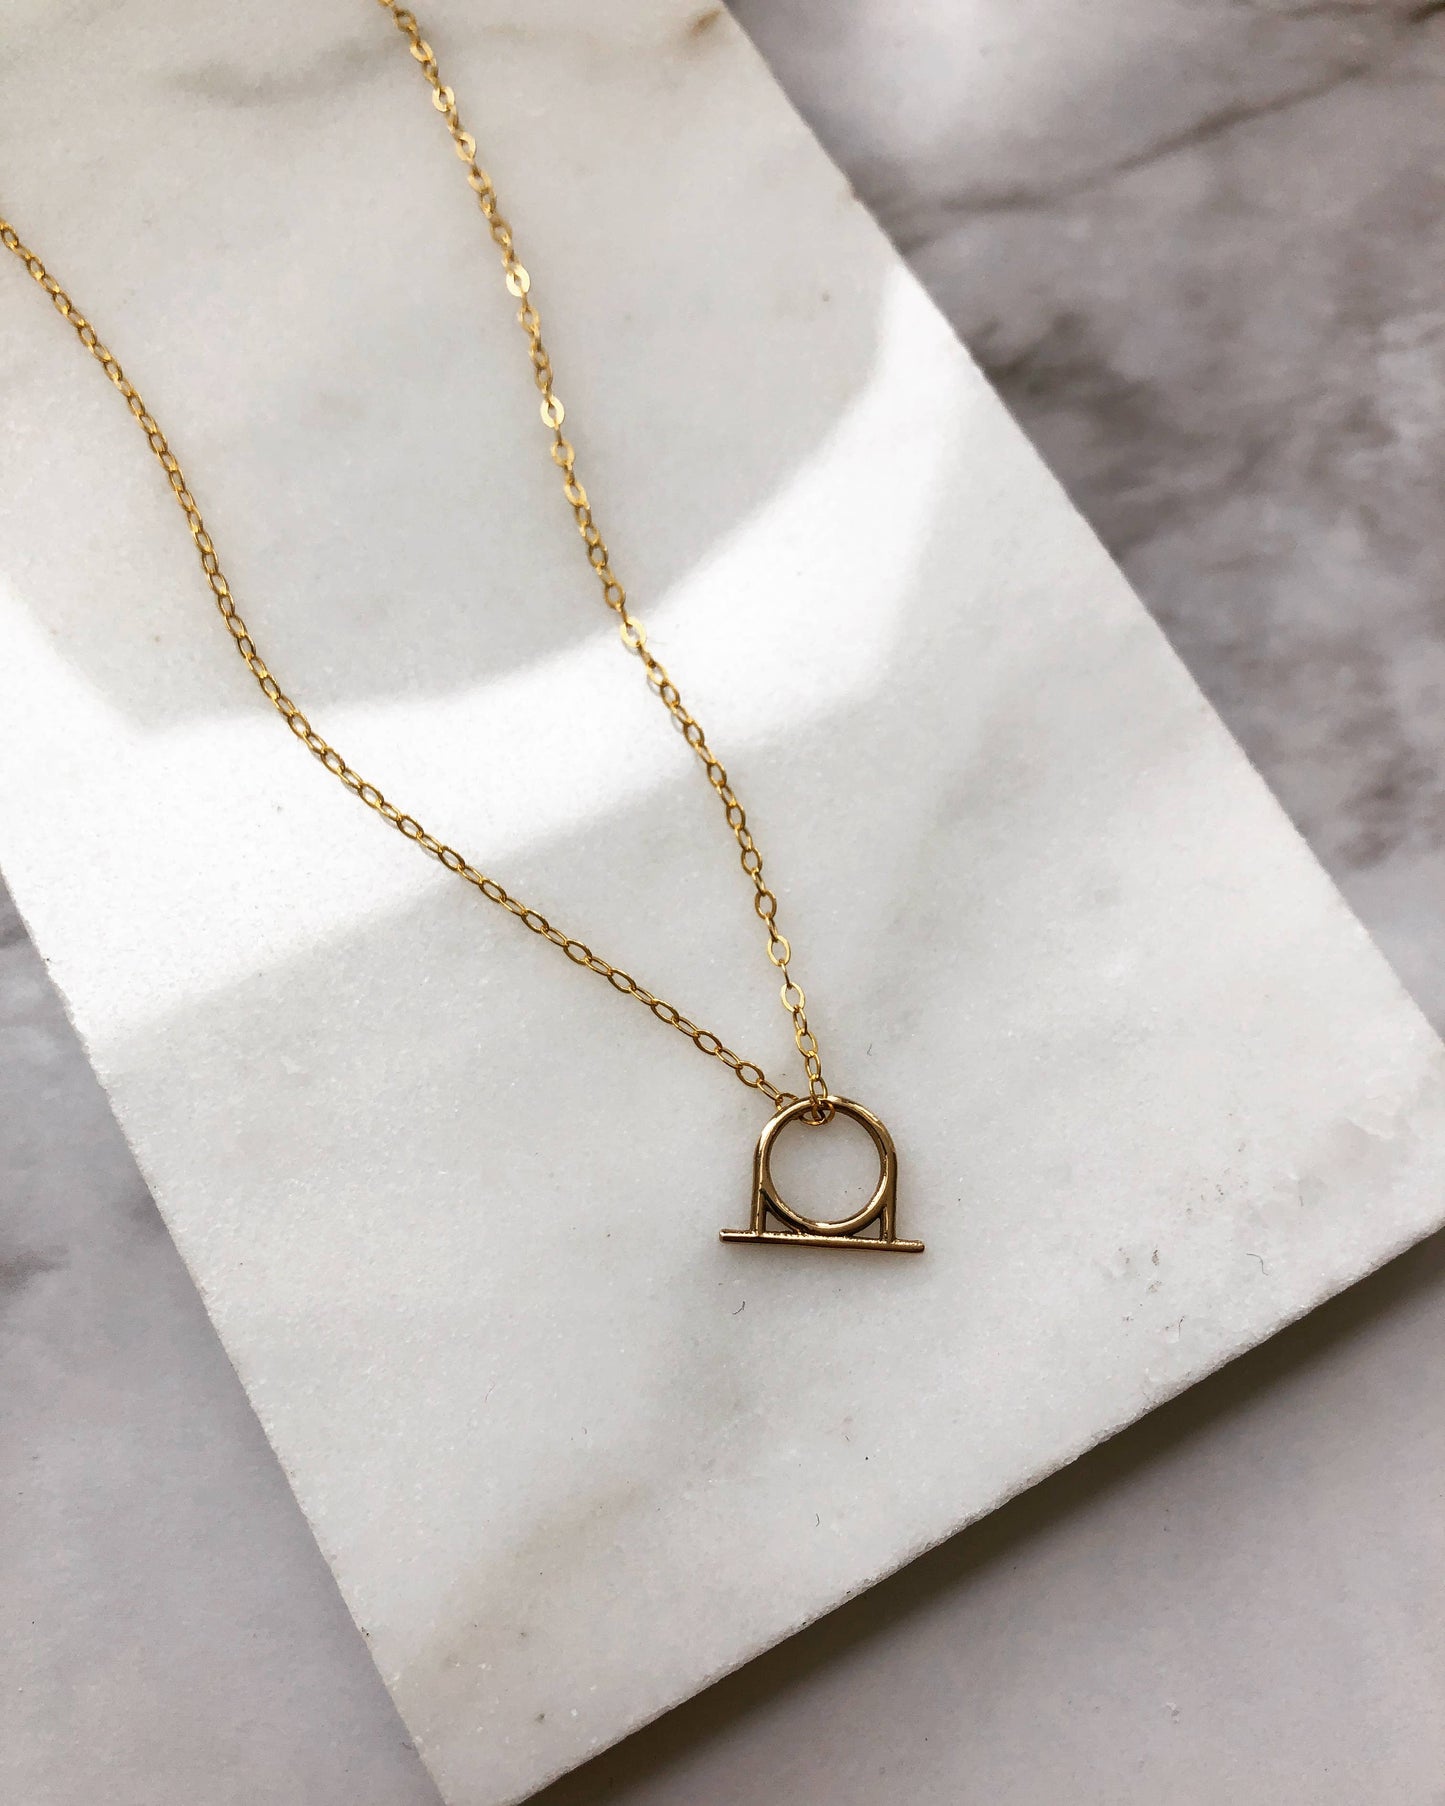 Emblem Charm Necklace: Solid 14k Gold Charm + Gold Fill Chain